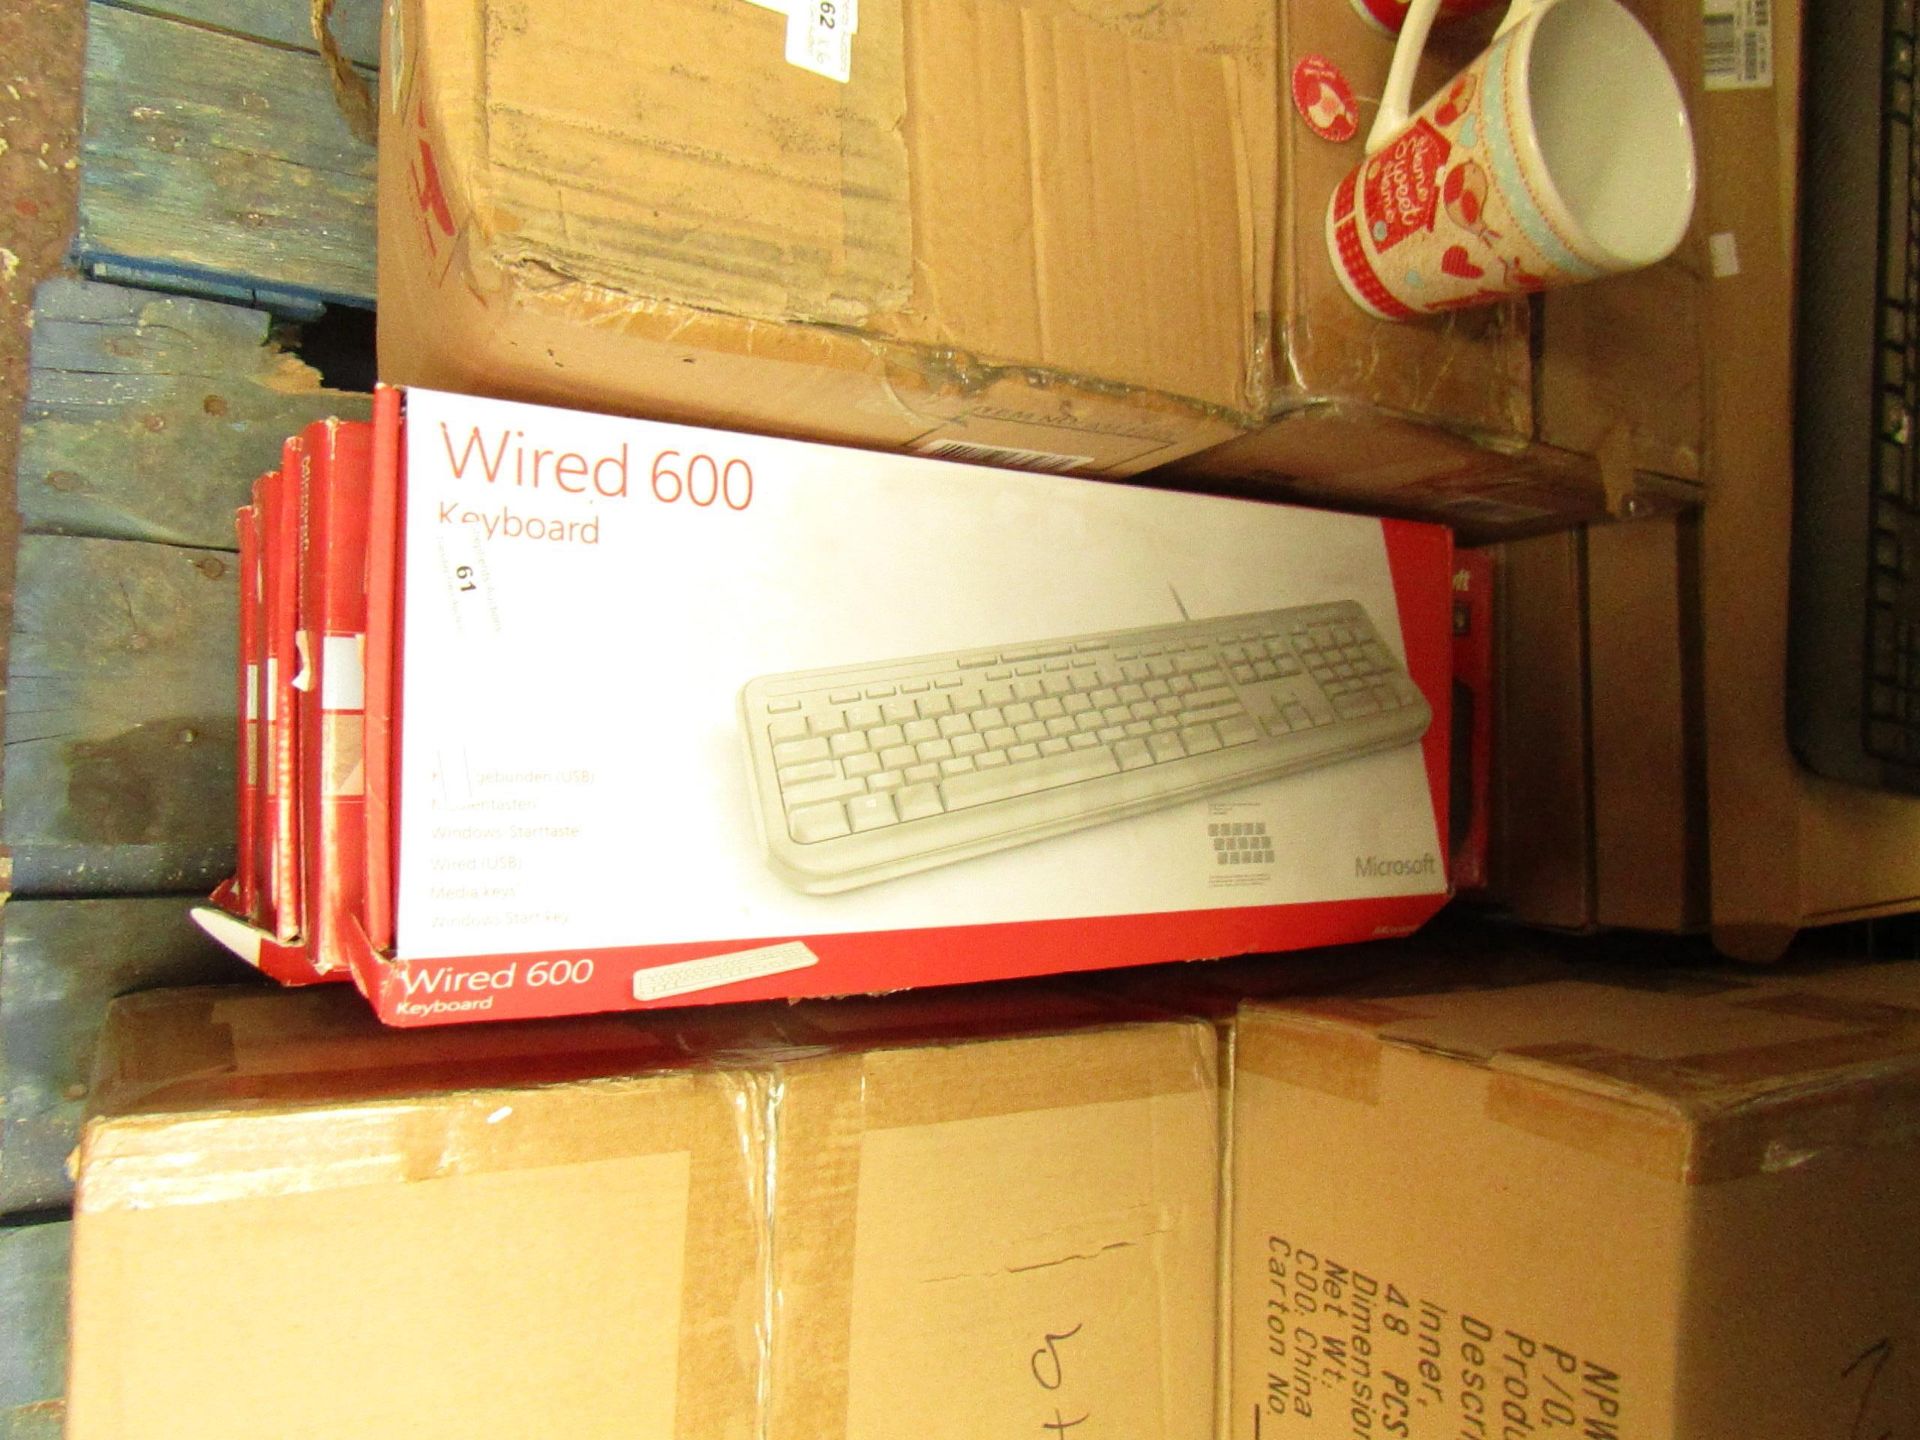 6x Microsoft - Wired 600 Keyboards - All Untested & Boxed.